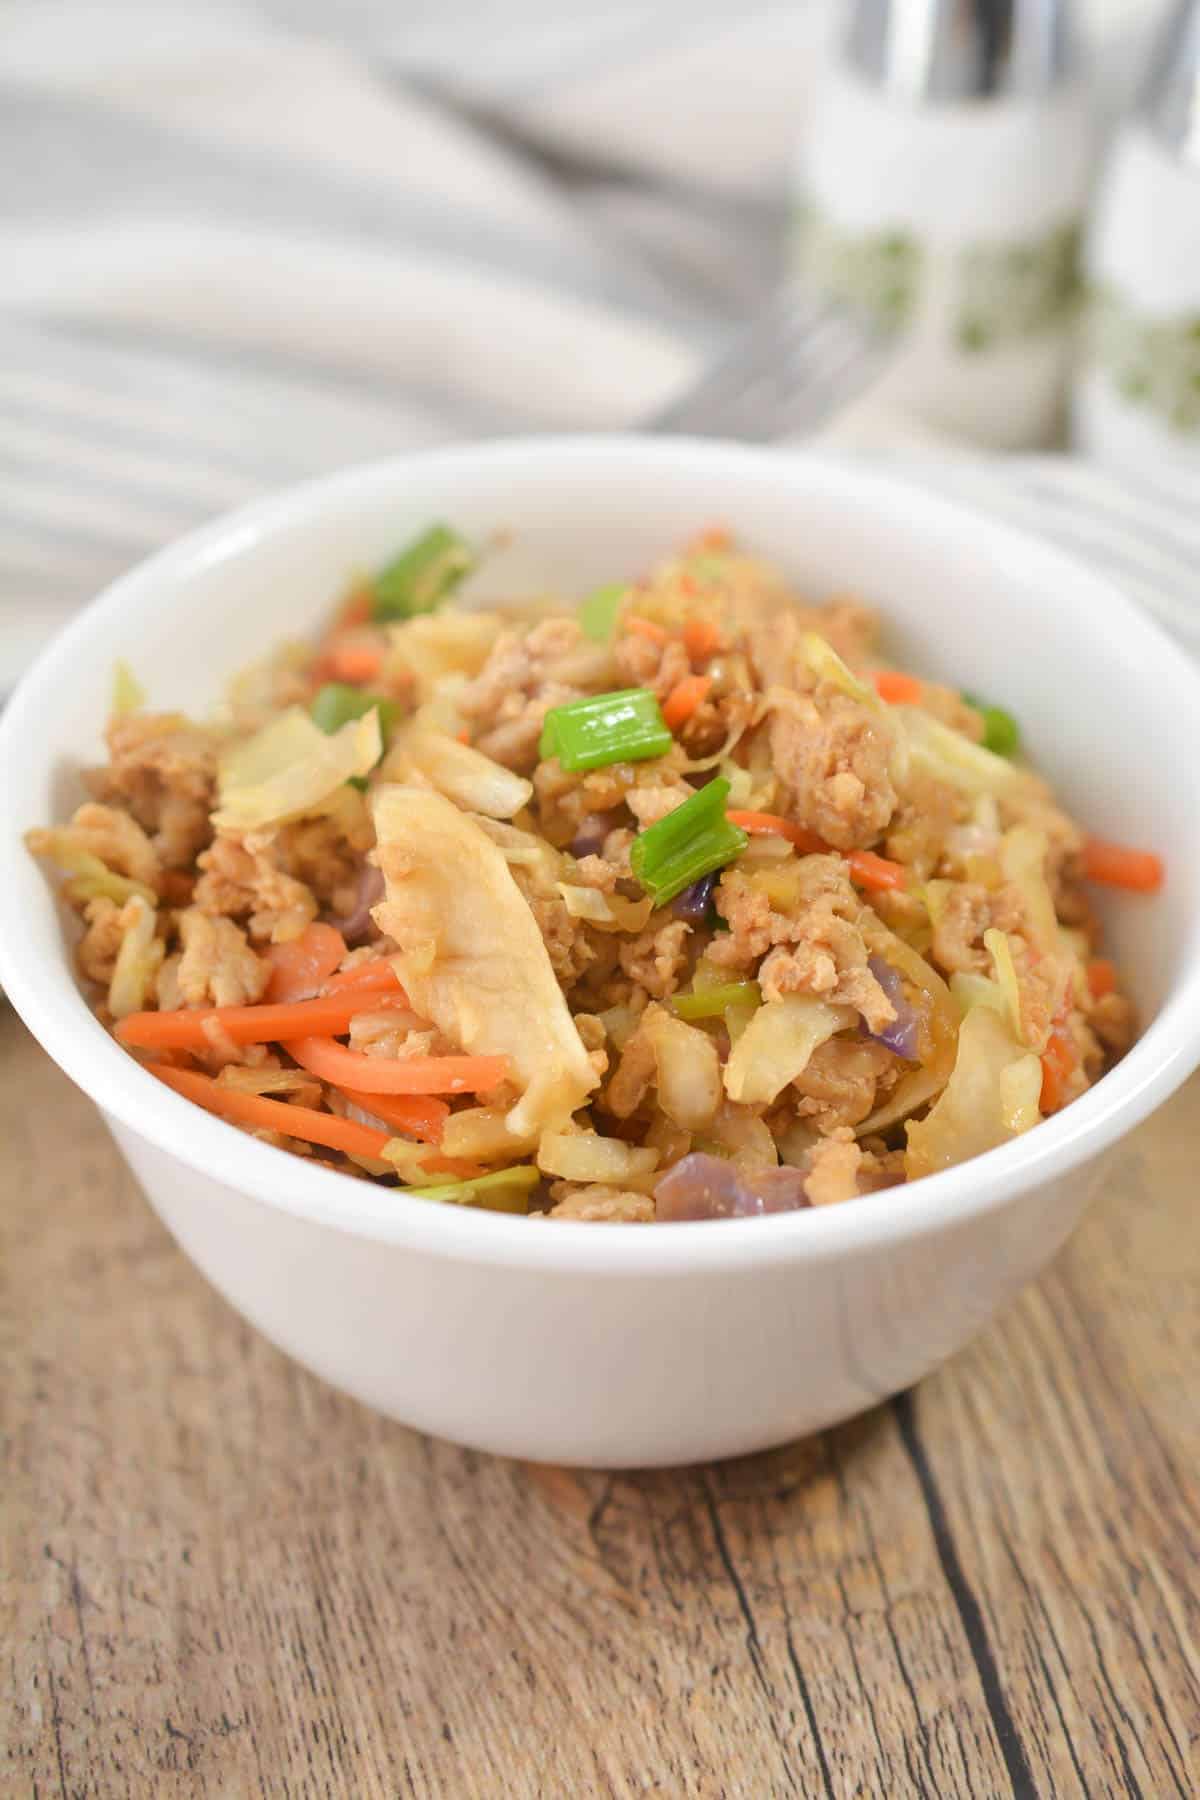 Chicken Egg Roll in a Bowl